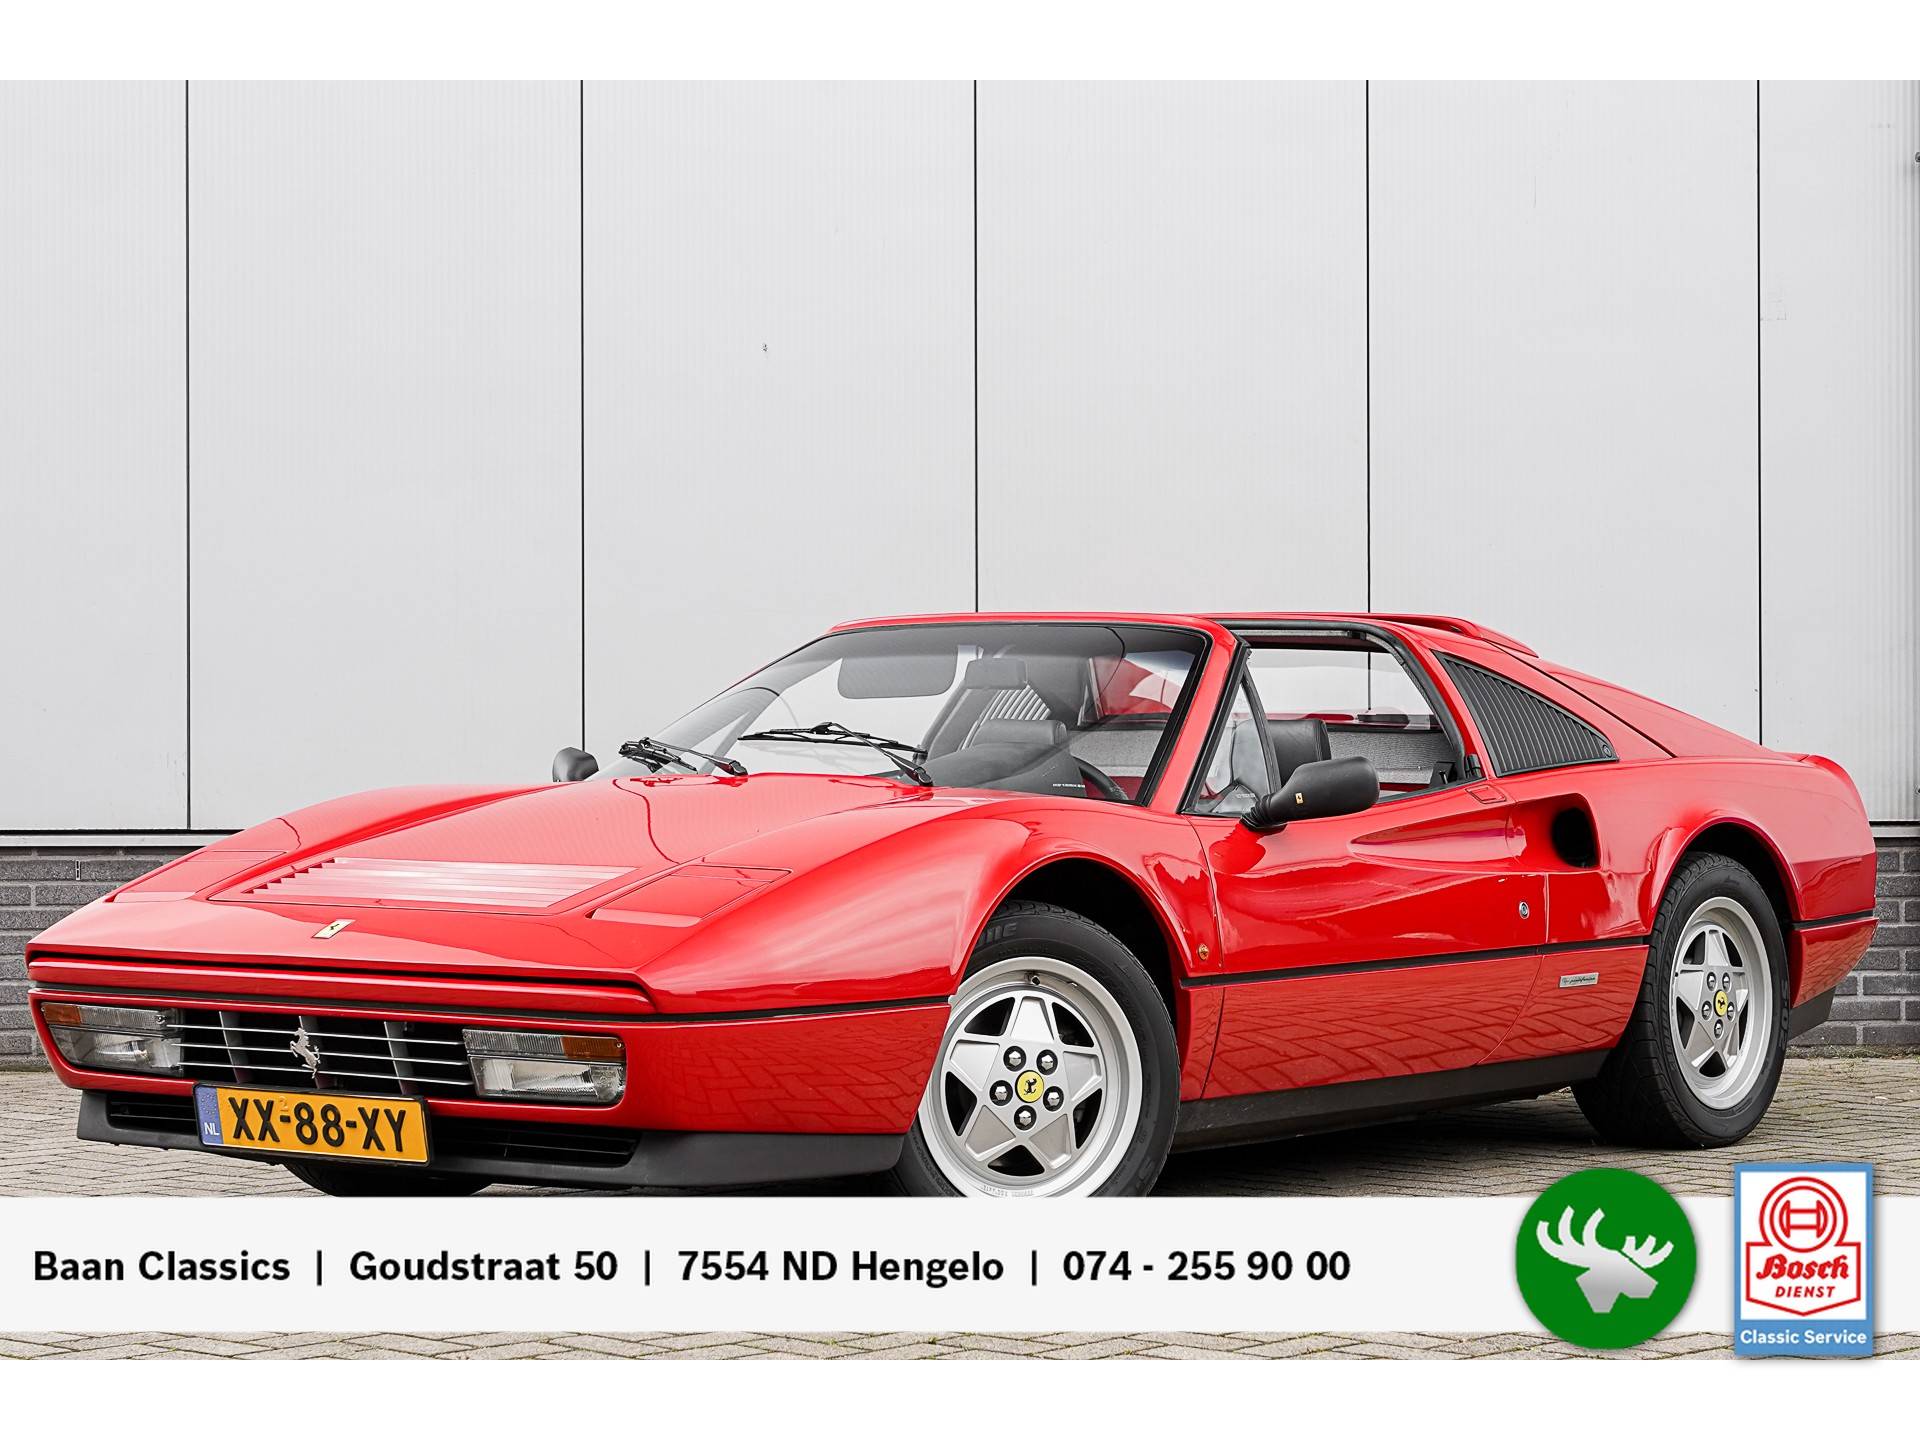 For Sale Ferrari 328 Gts 19 Offered For Gbp 145 758